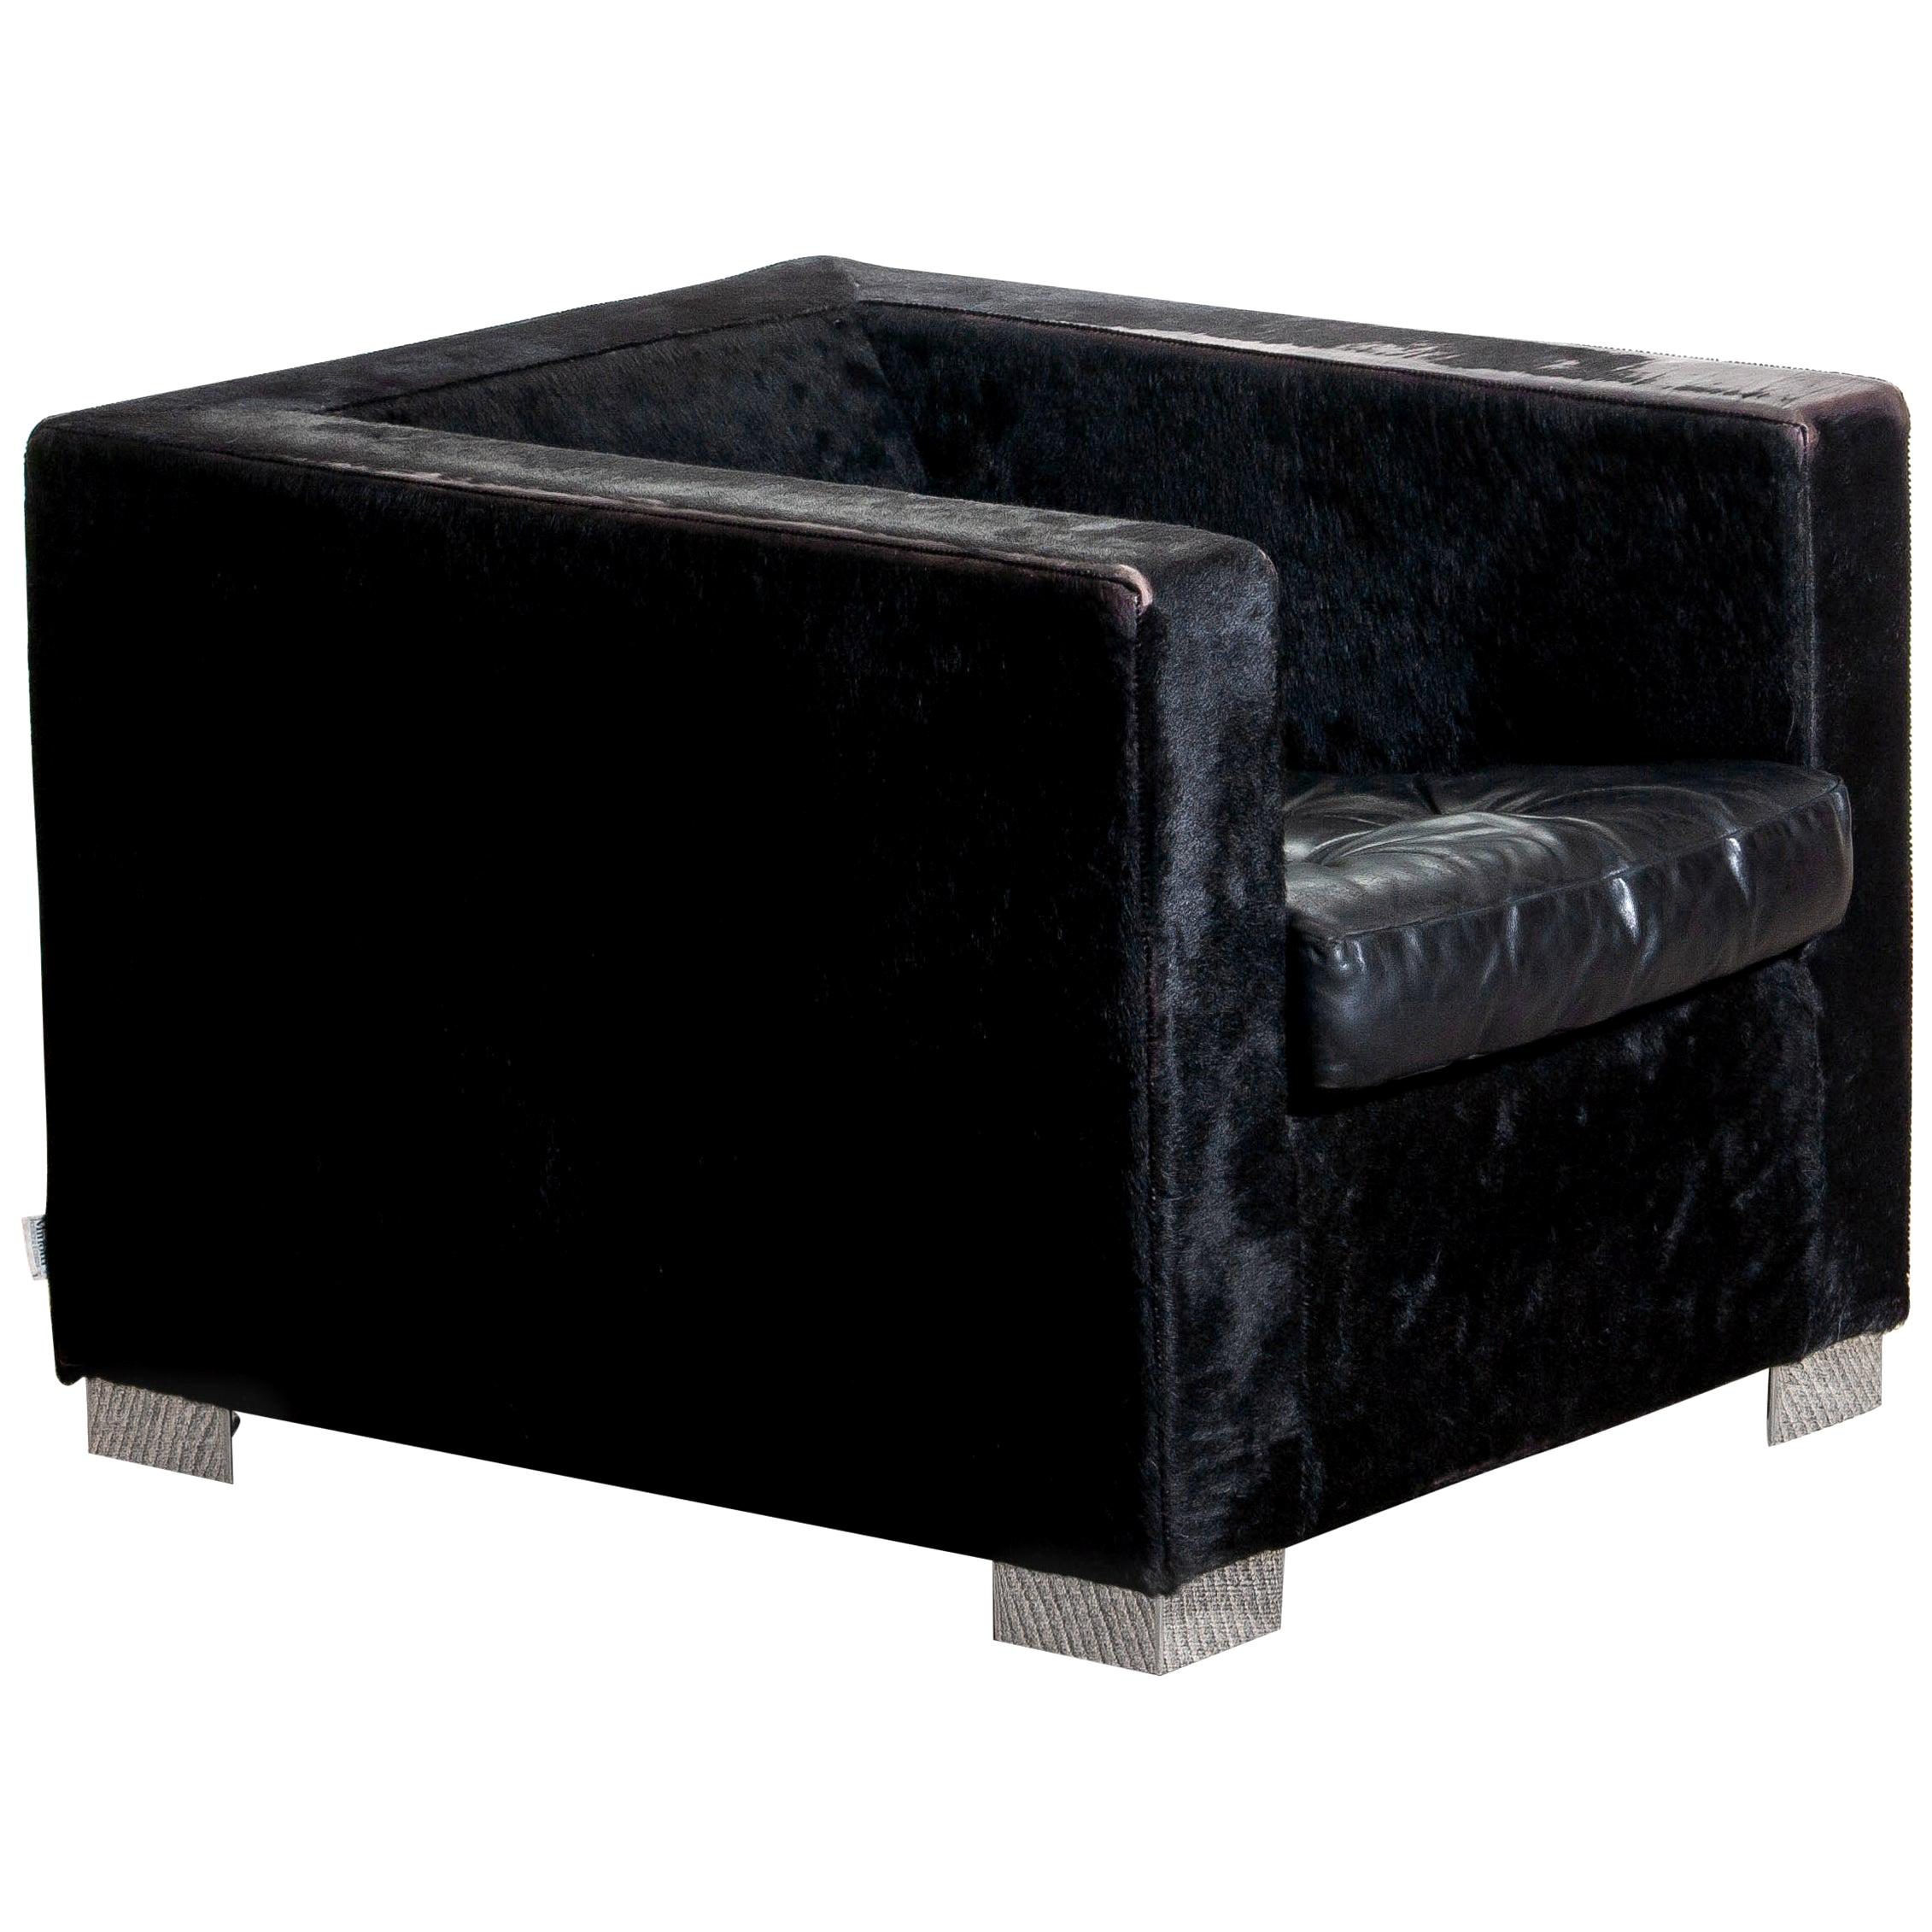 Mid-Century Modern 1990s, Black Lounge Chair in Pony Coat Leather by Rodolfo Dordoni for Minotti